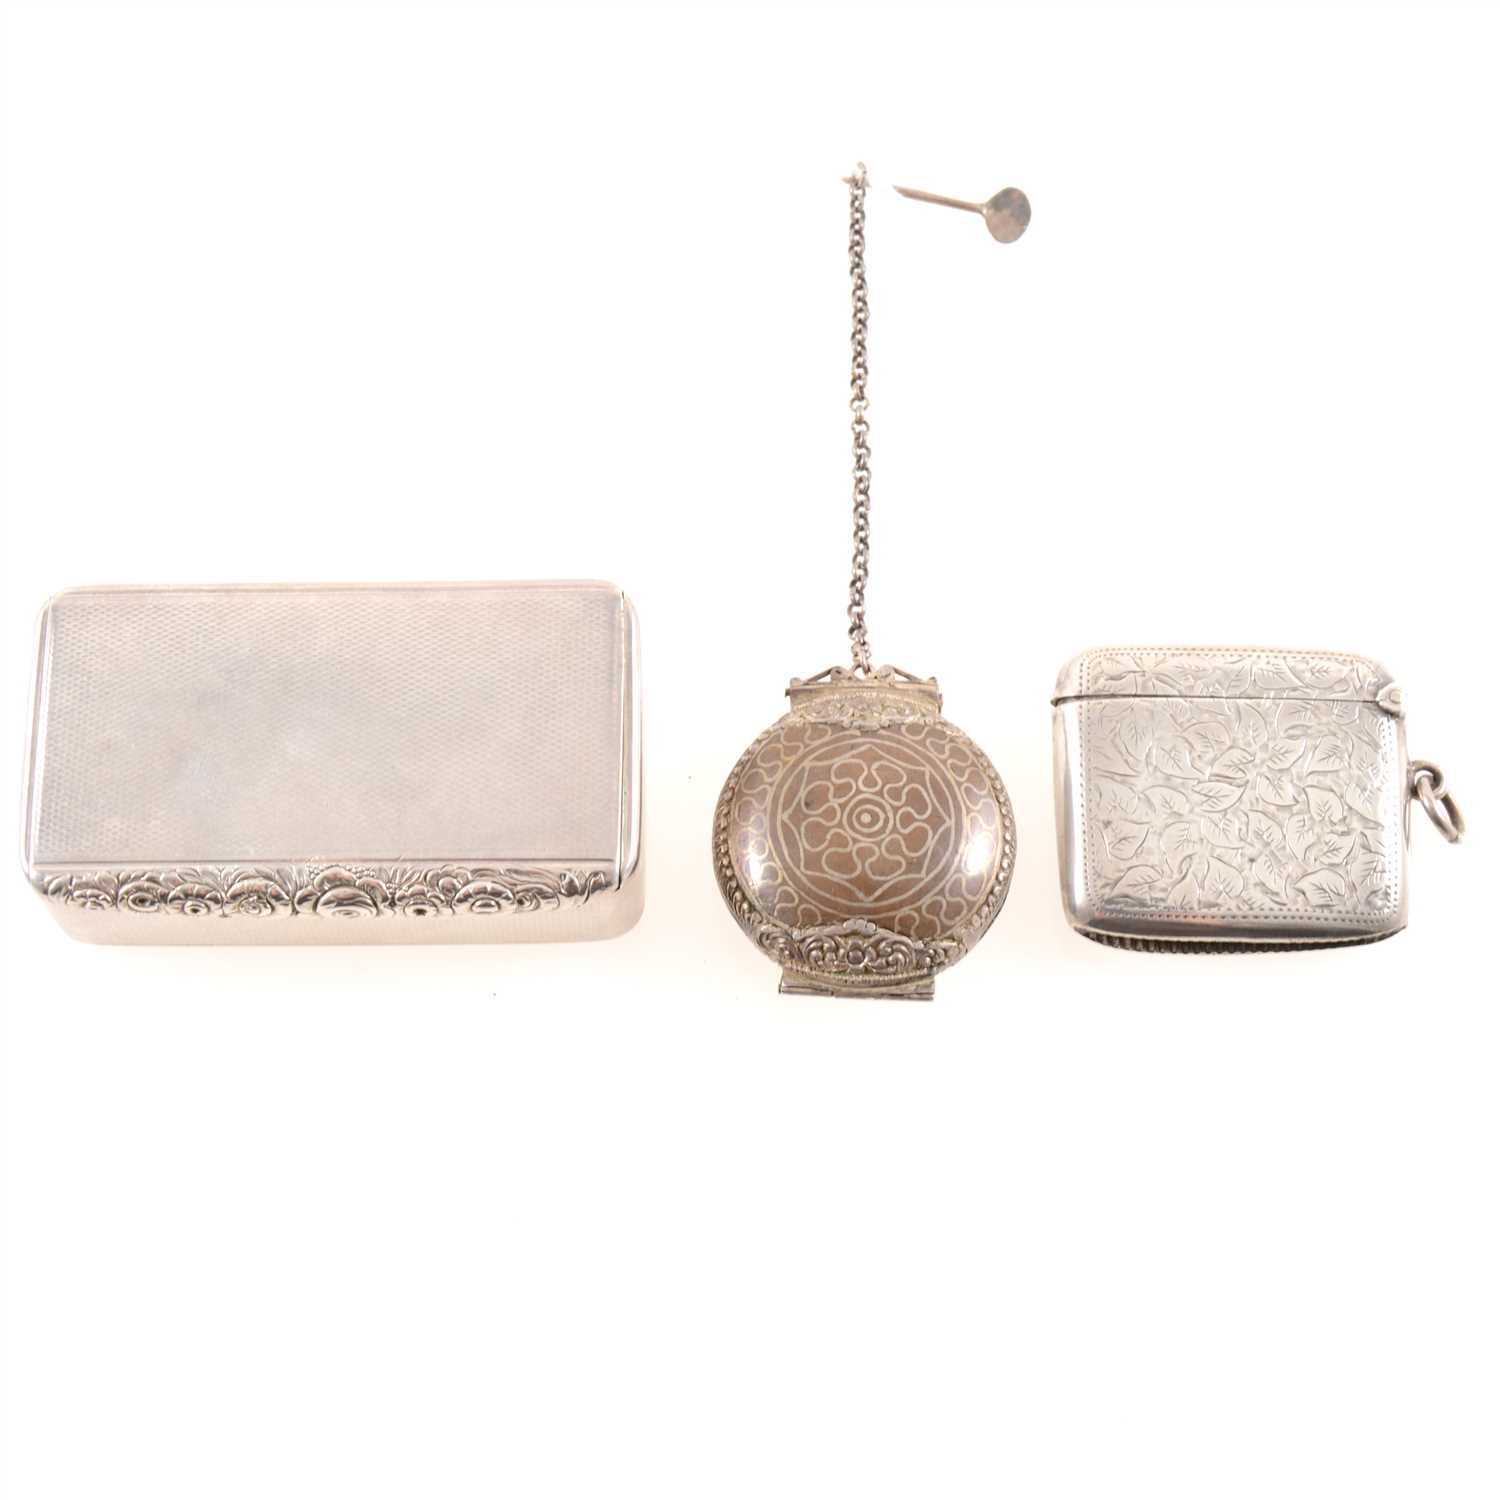 Lot 174 - A silver engine turned snuff box, possibly John Linnit, London, 1815, a silver vesta, and a betel lime (Chunam) box on a chain.